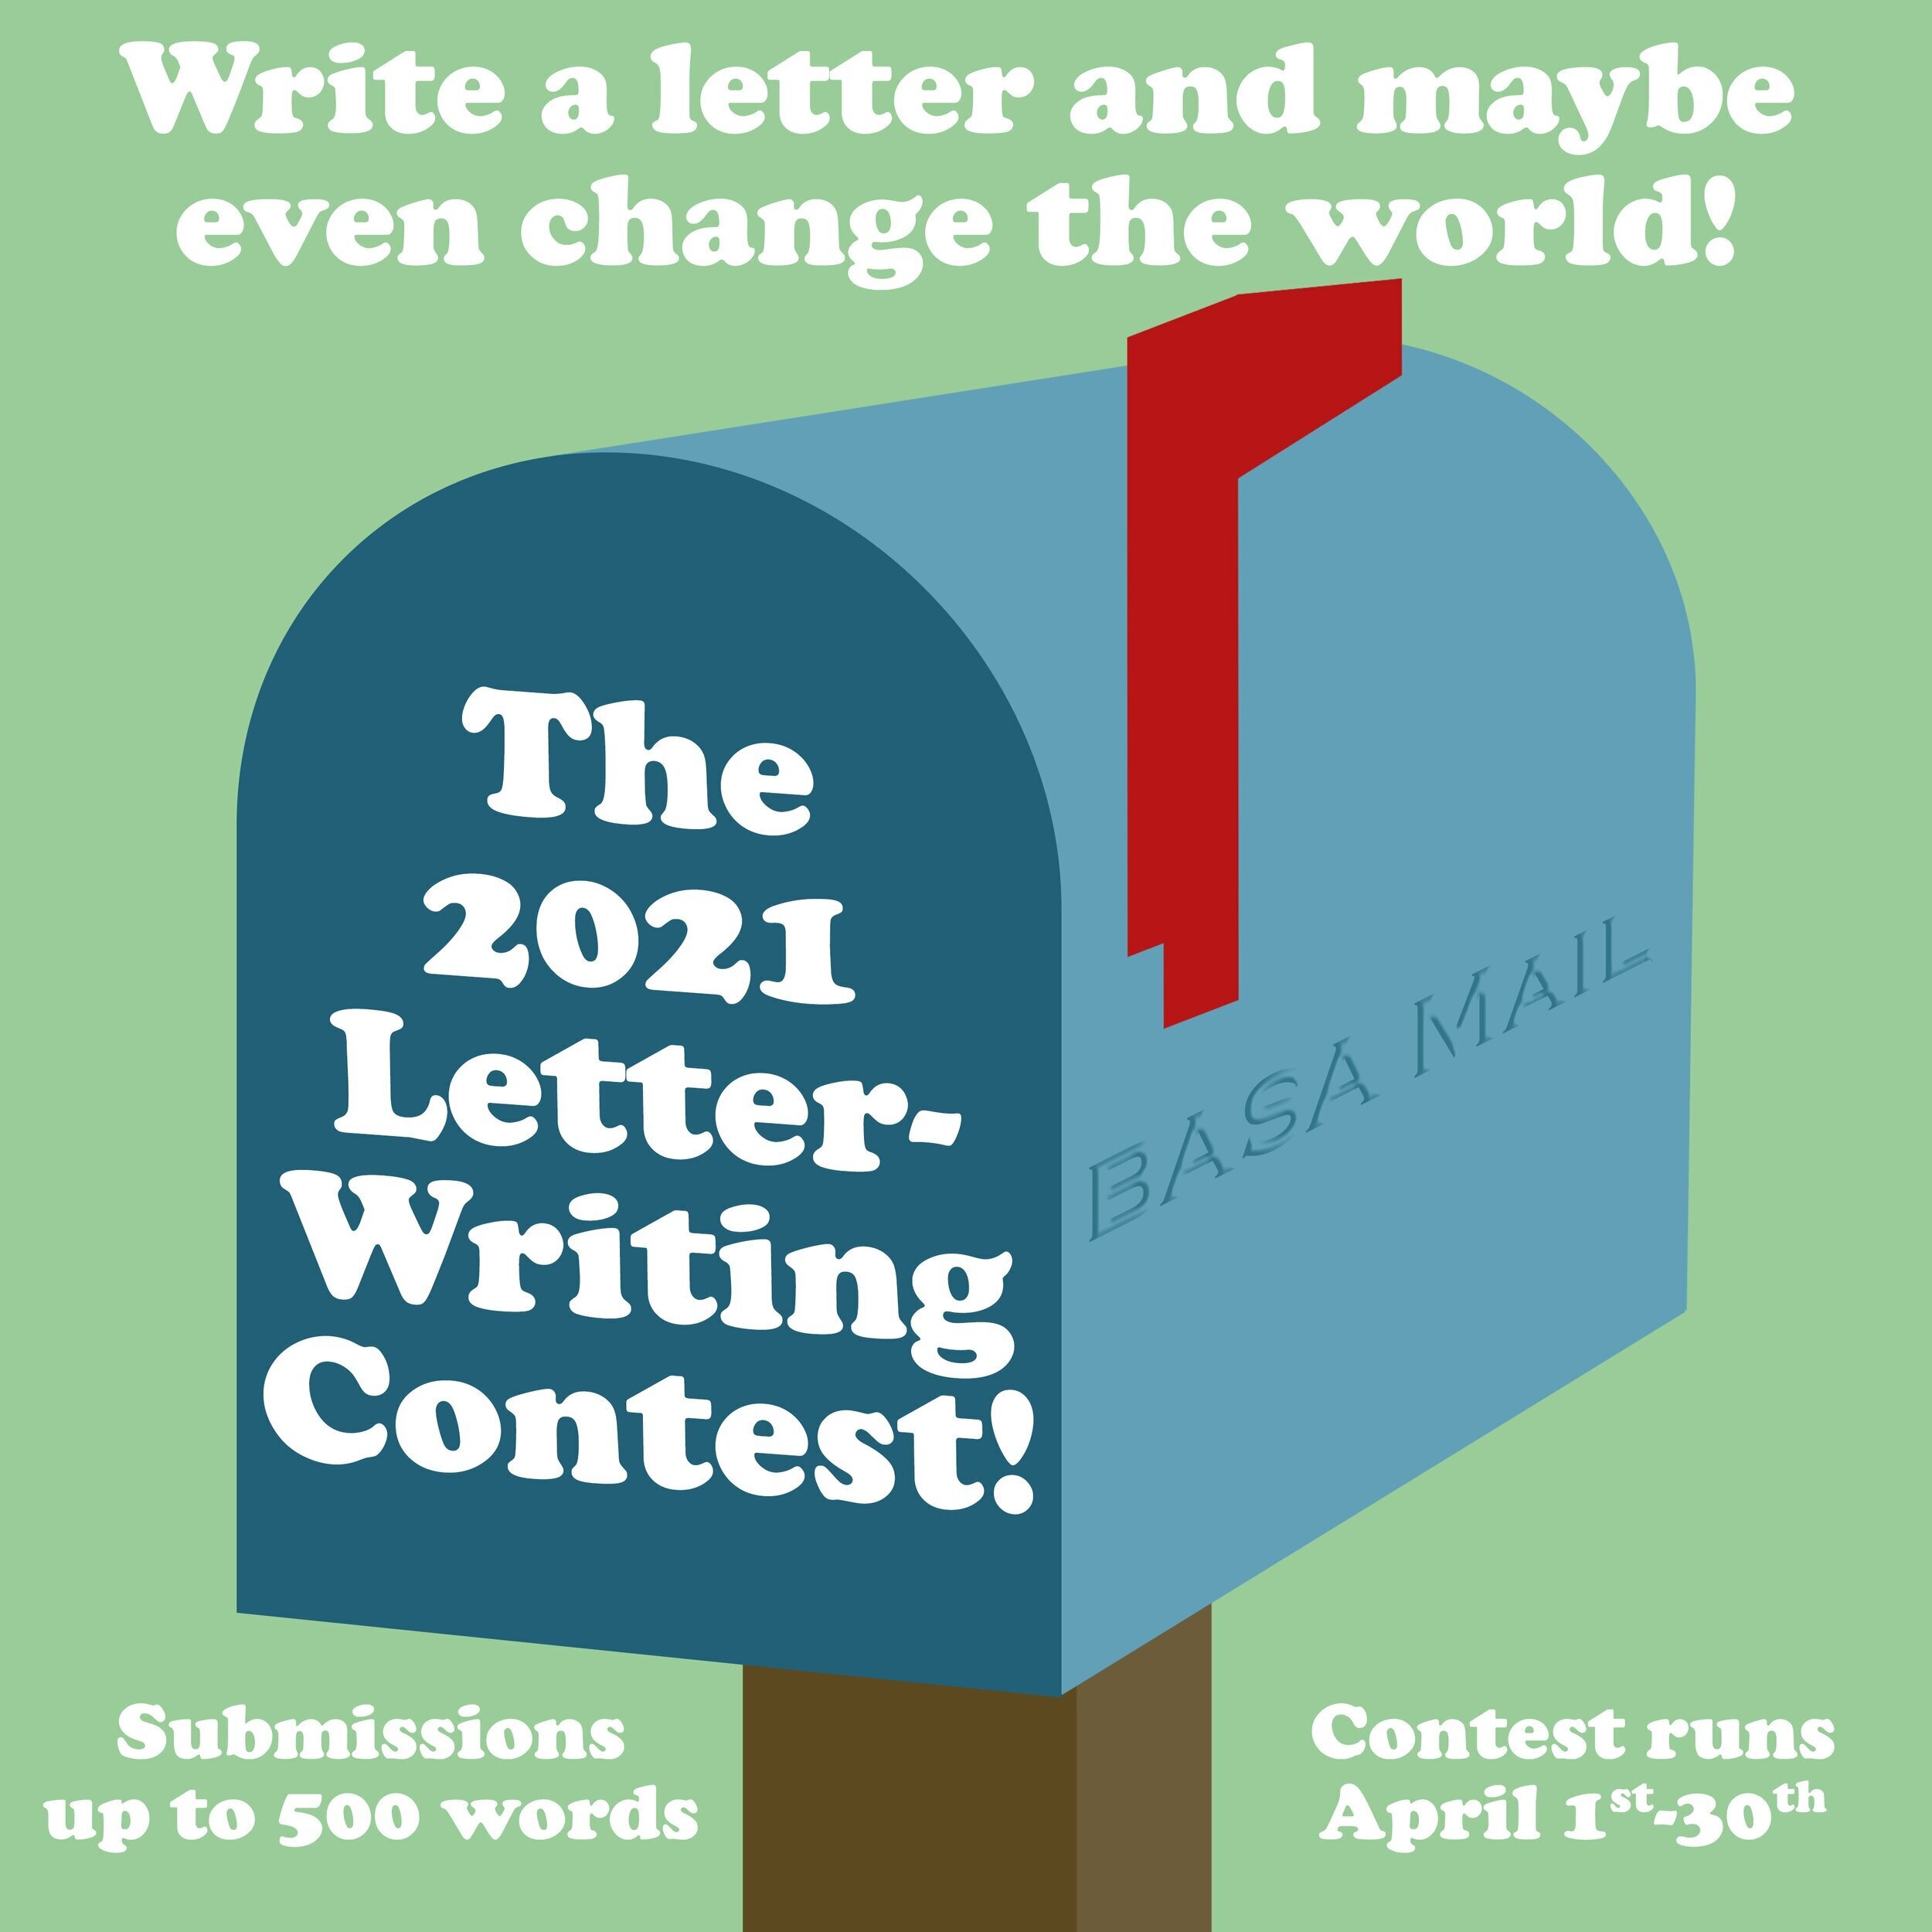 The 2021 Letter Writing Contest